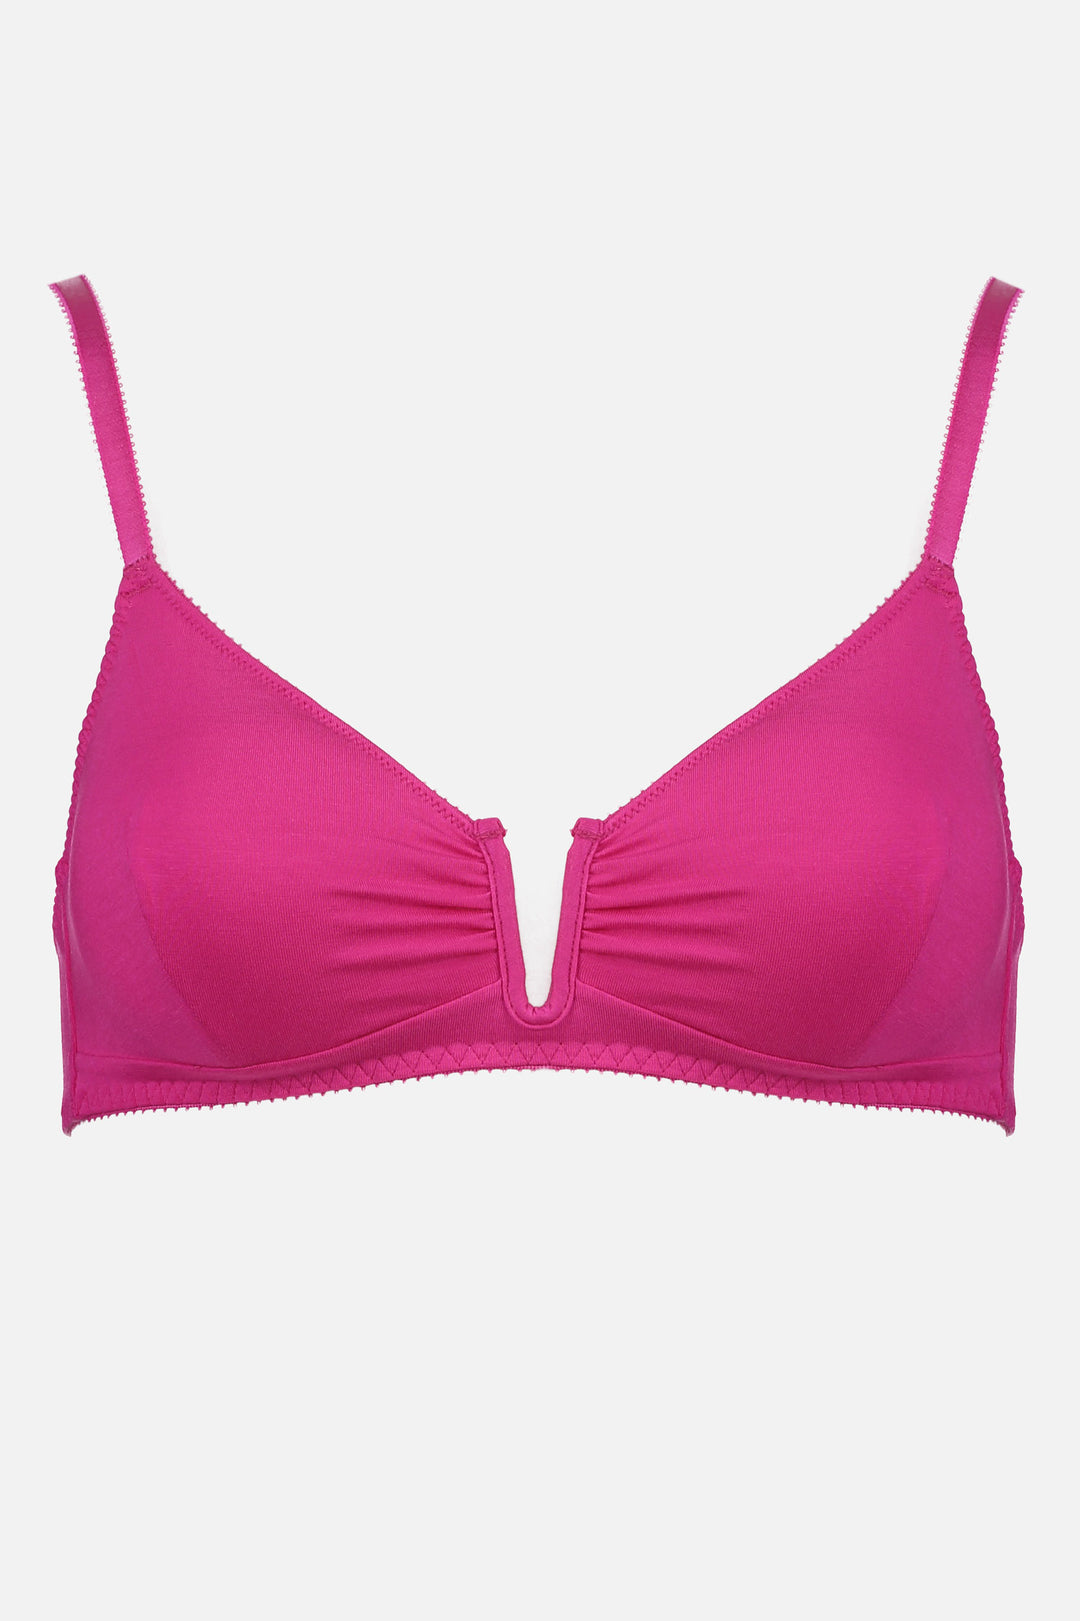 Videris Lingerie Angela underwire free soft cup bra in magenta TENCEL™ has a triangle shaped cup and U wire in the front